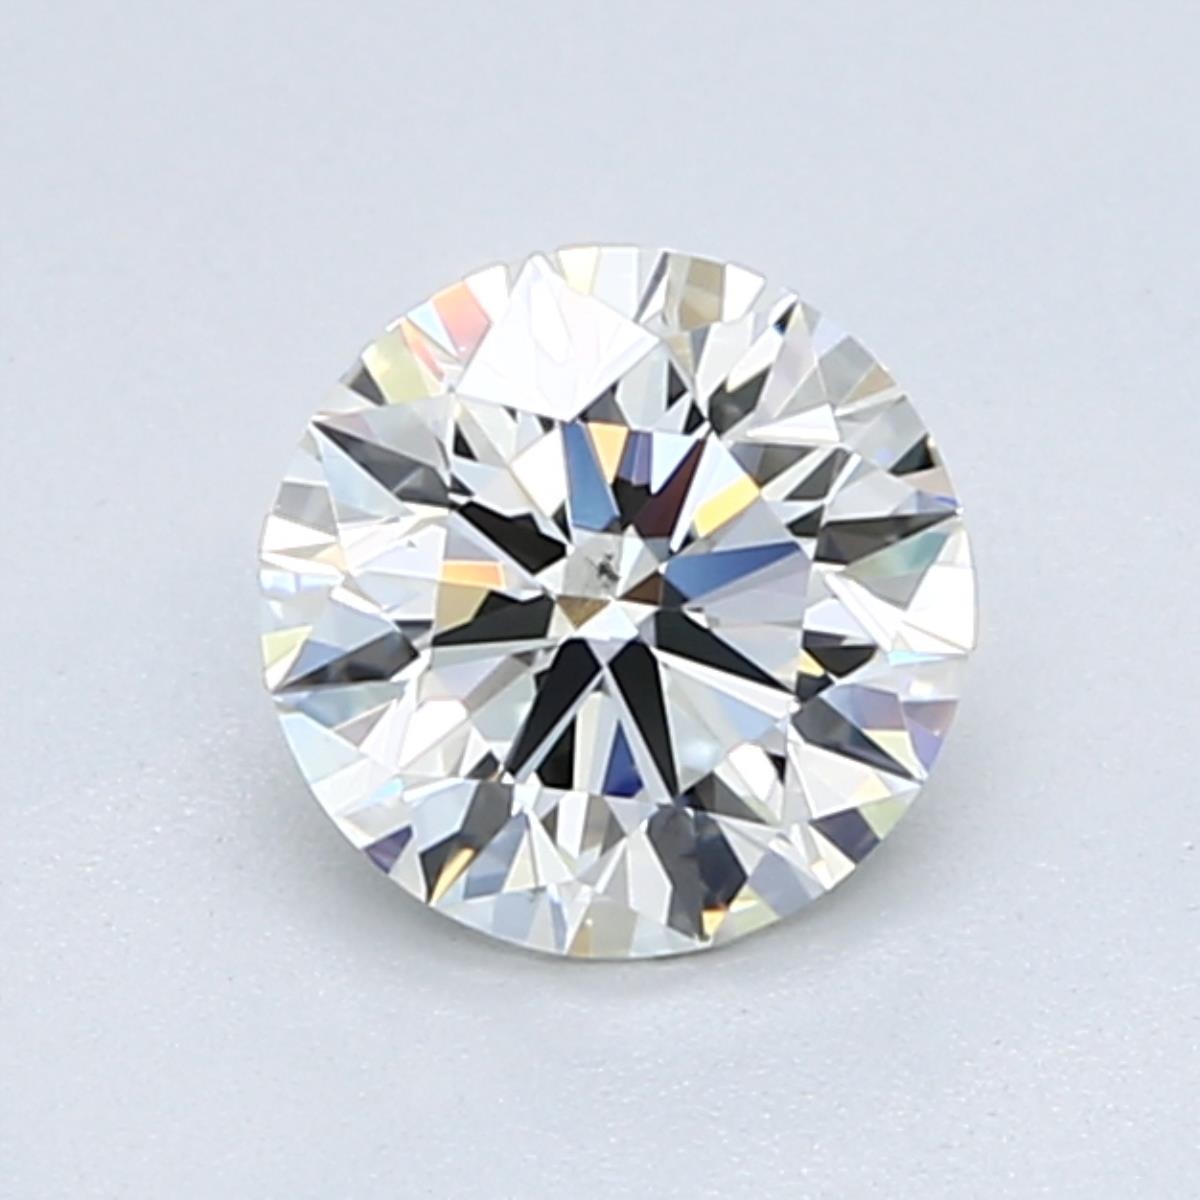 Round 1.05 Carat J Color VS2 Clarity For Sale